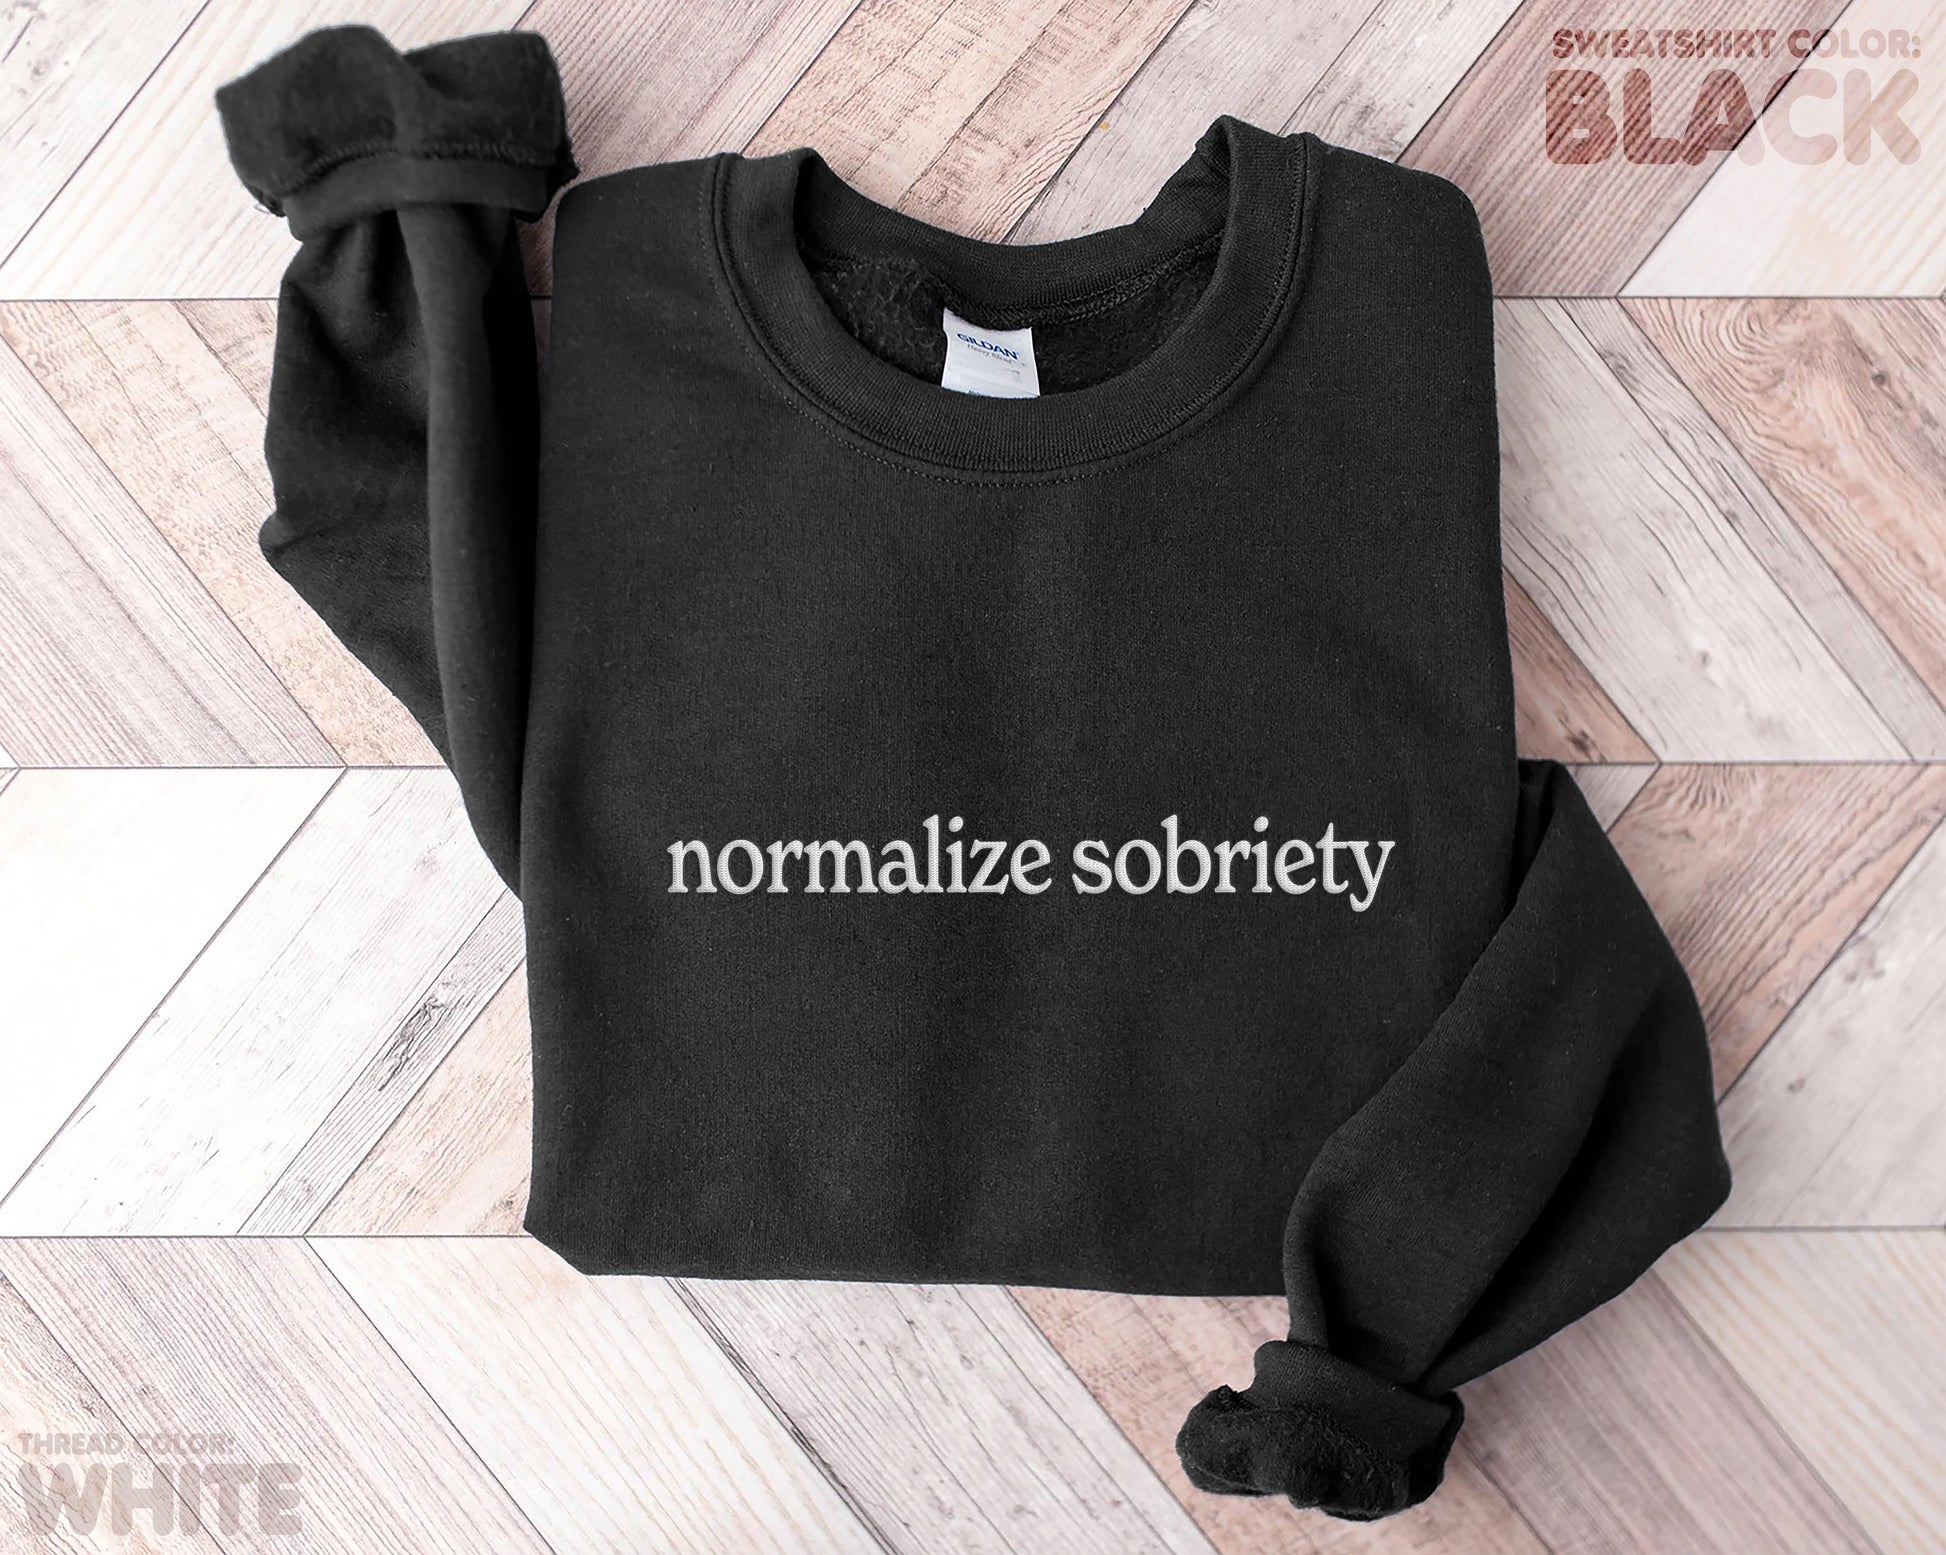 "normalize sobriety" embroidered sweatshirt - funravel